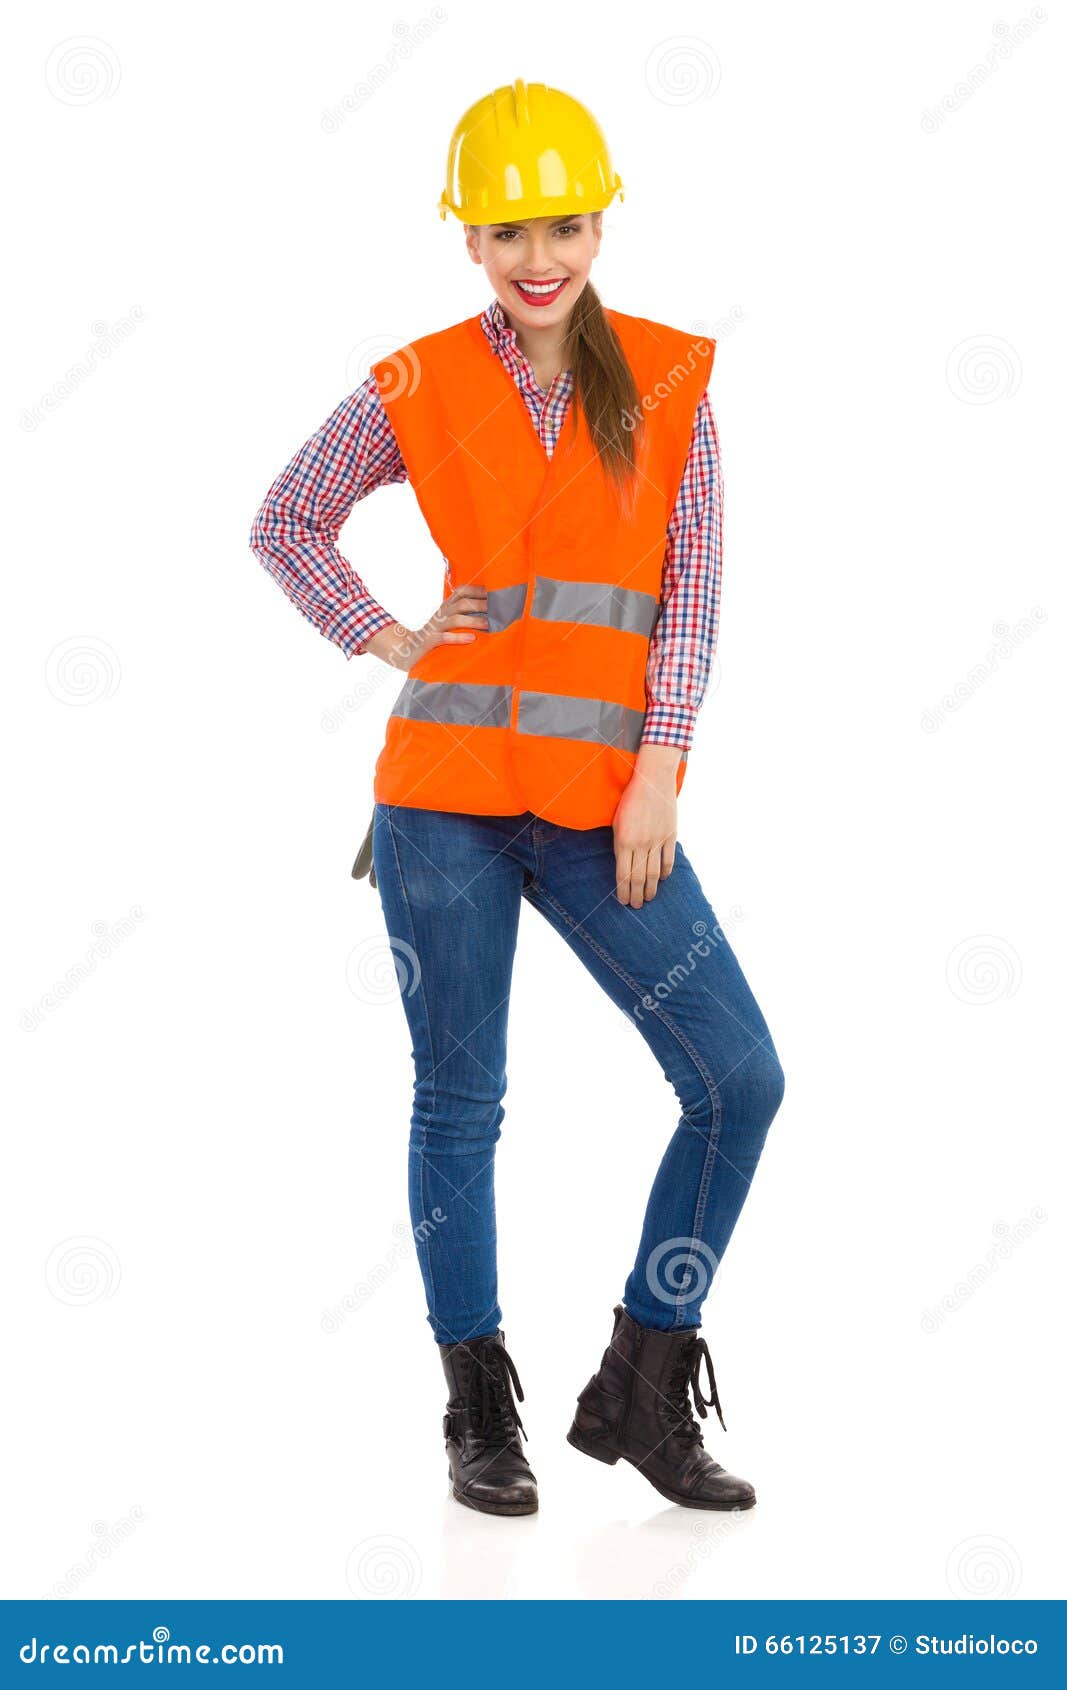 Smiling Female Construction Worker Stock Image Image Of Clothing Cutout 66125137